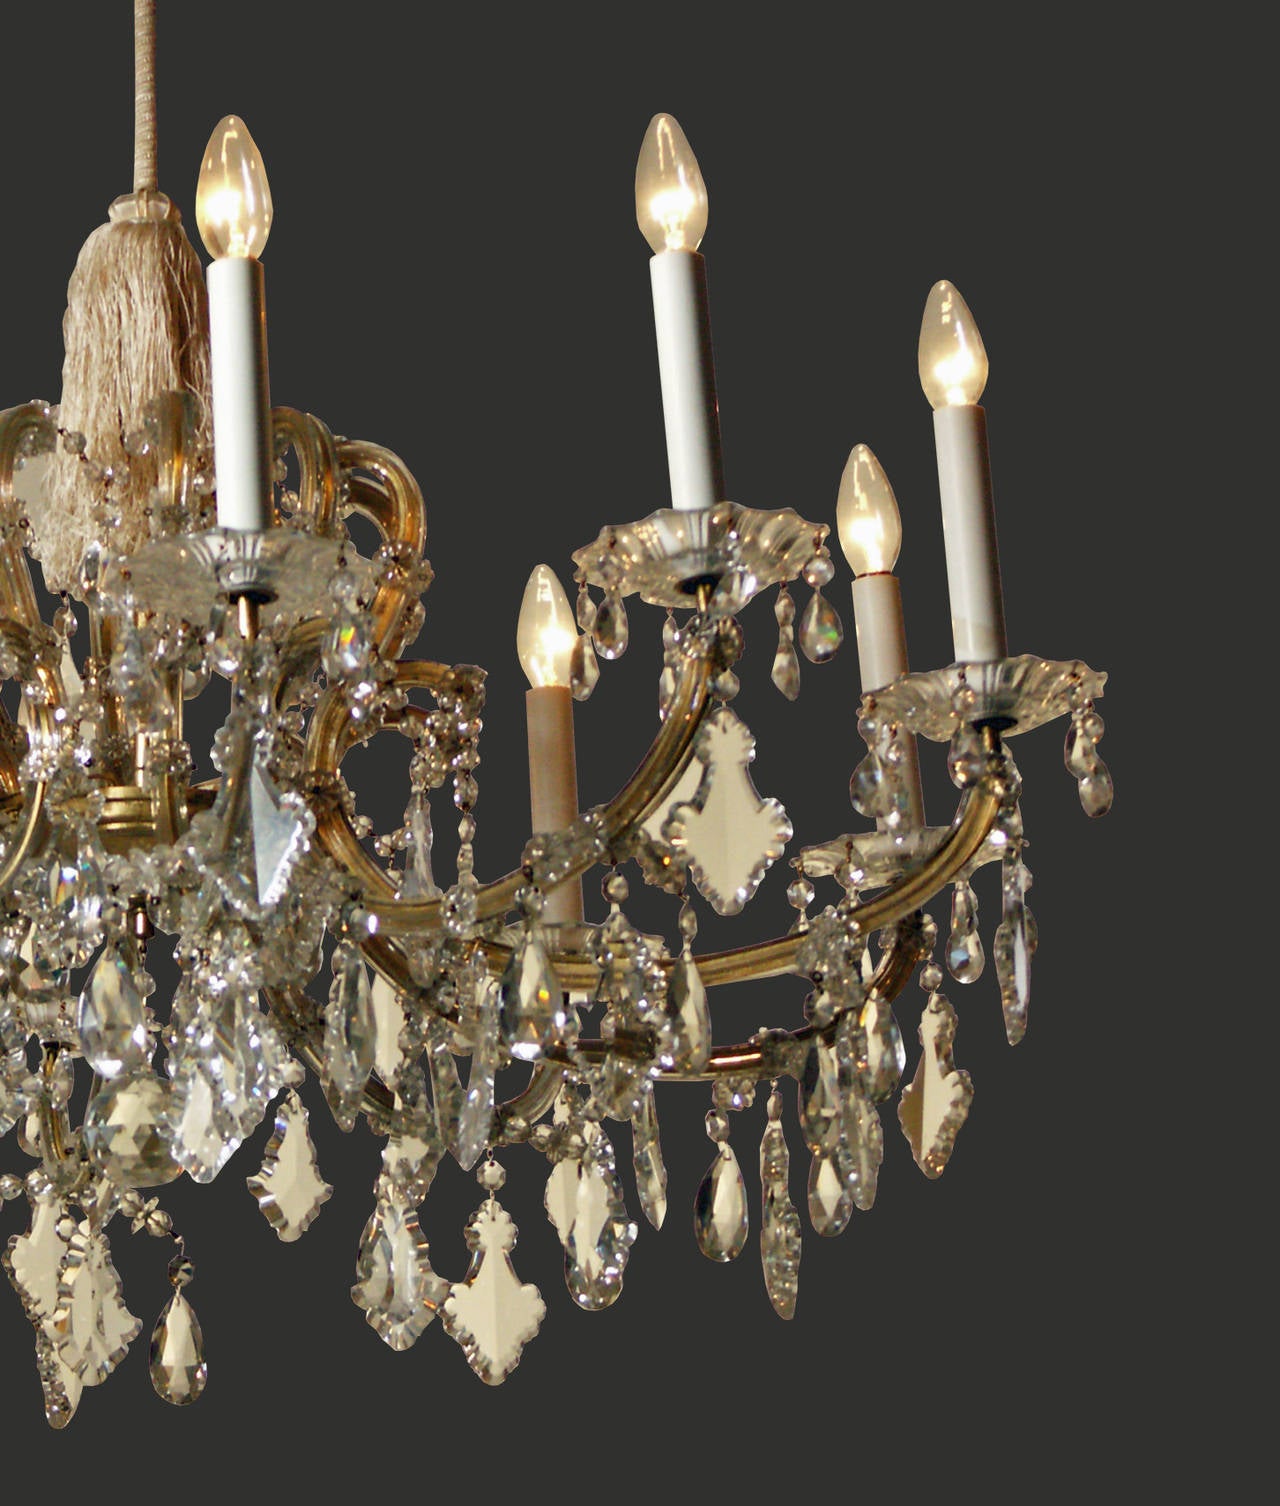 Beautiful Viennese chandelier, in the Maria Theresa style. Ten-arms and flames. Measures not including chain and rose.